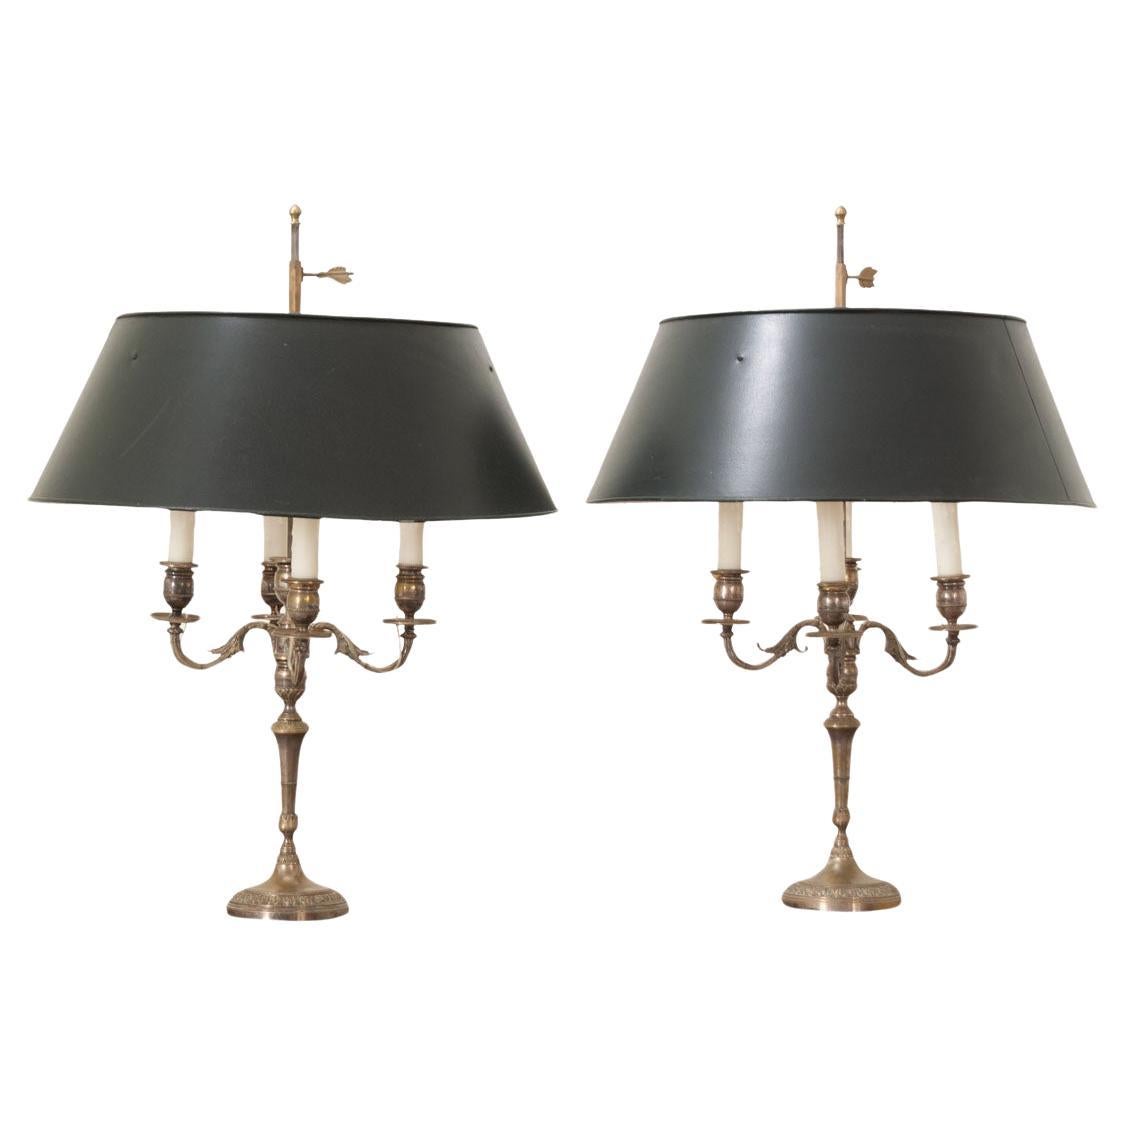 Pair of Candelabra Lamps in the Bouillotte Style